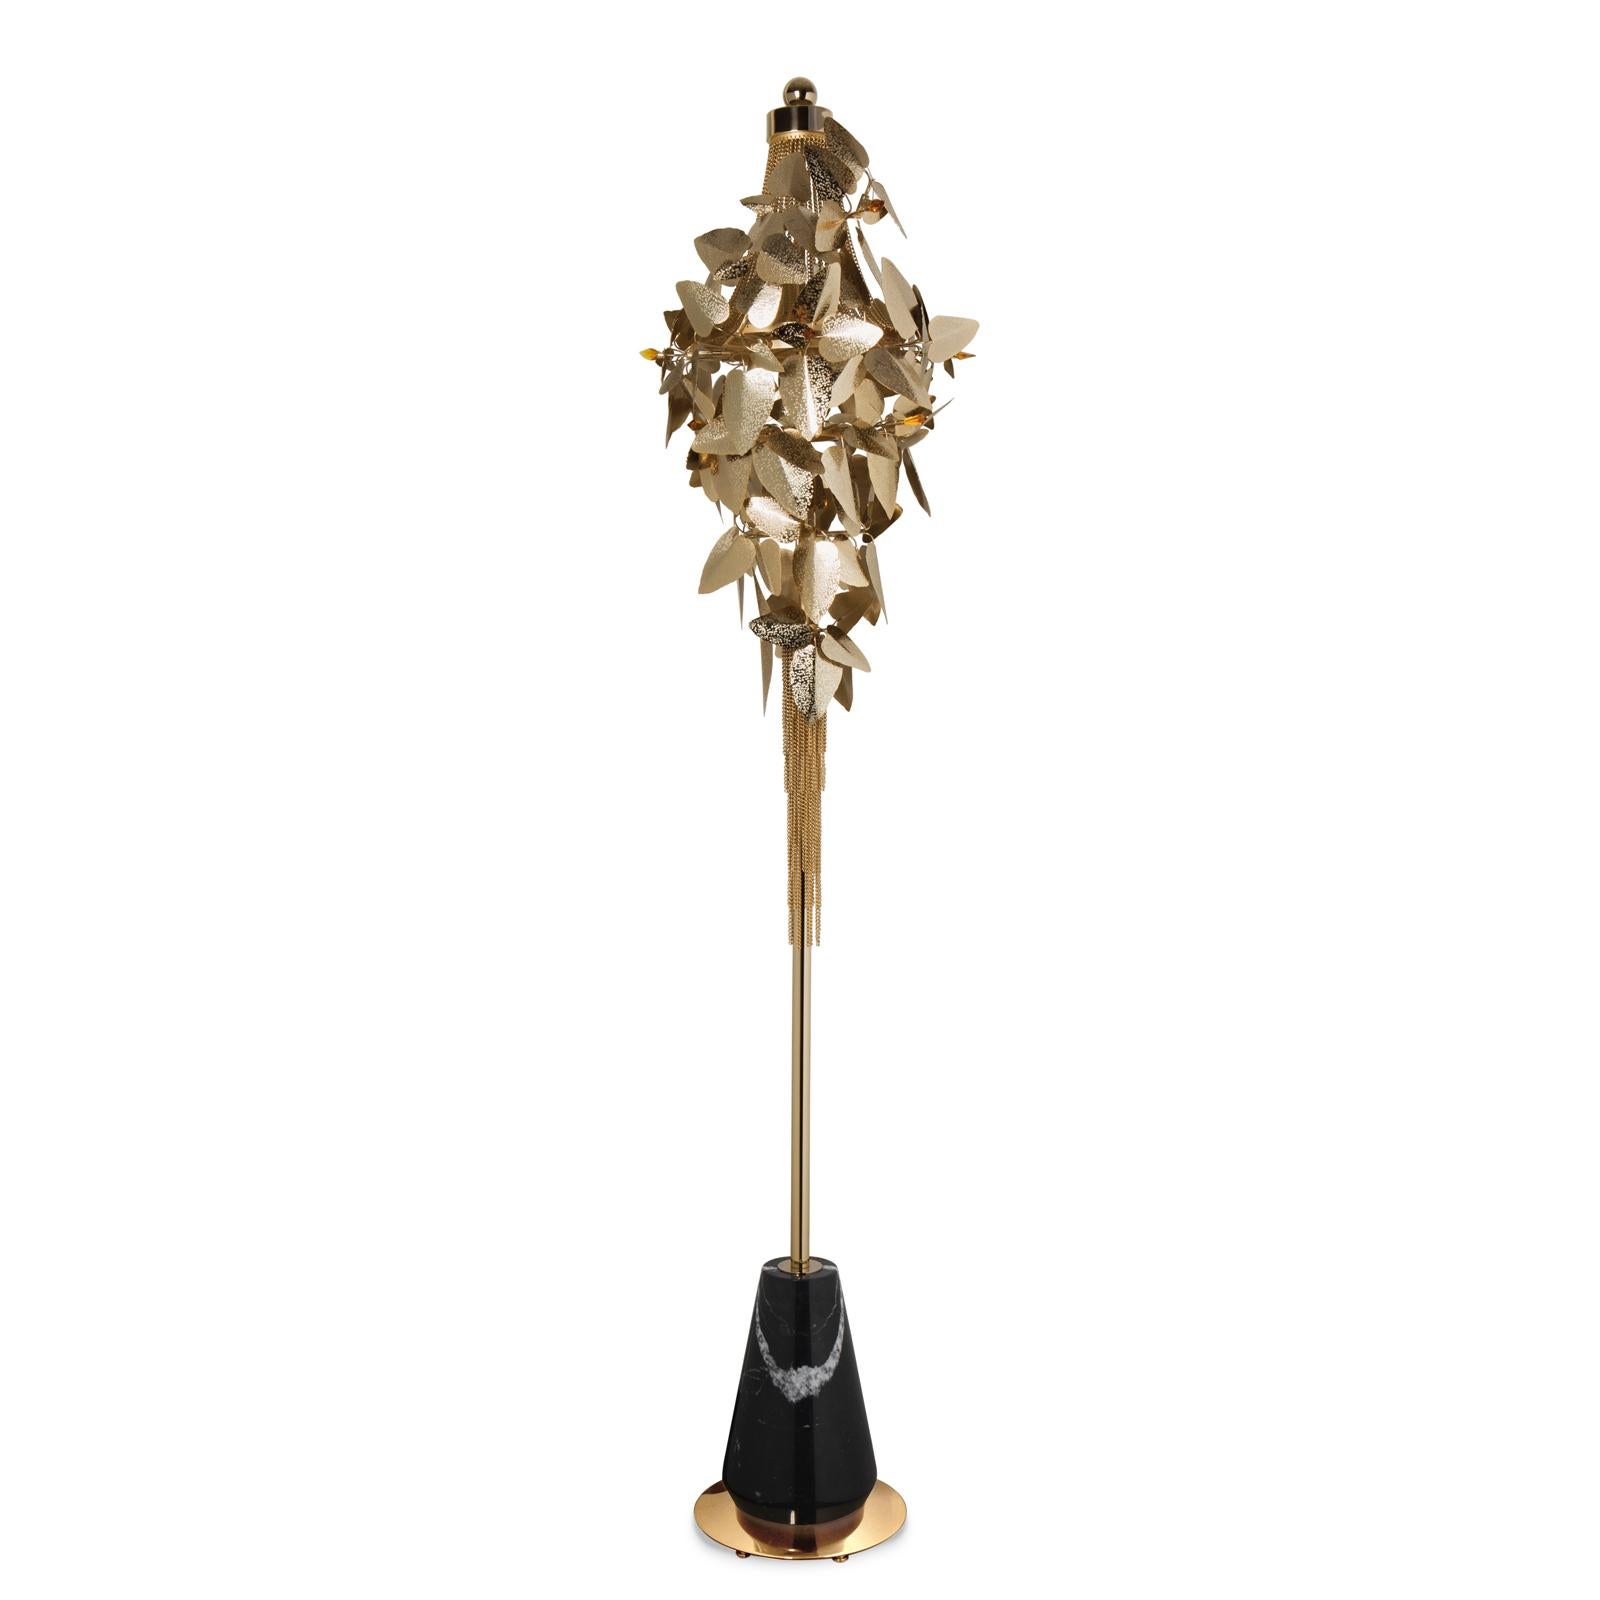 Floor lamp crown leaves with Swarovski crystal.
Leaves in gold plated hand-hammered with amber Swarovski crystals. 
With a black marble and polished brass base. Subtle piece.